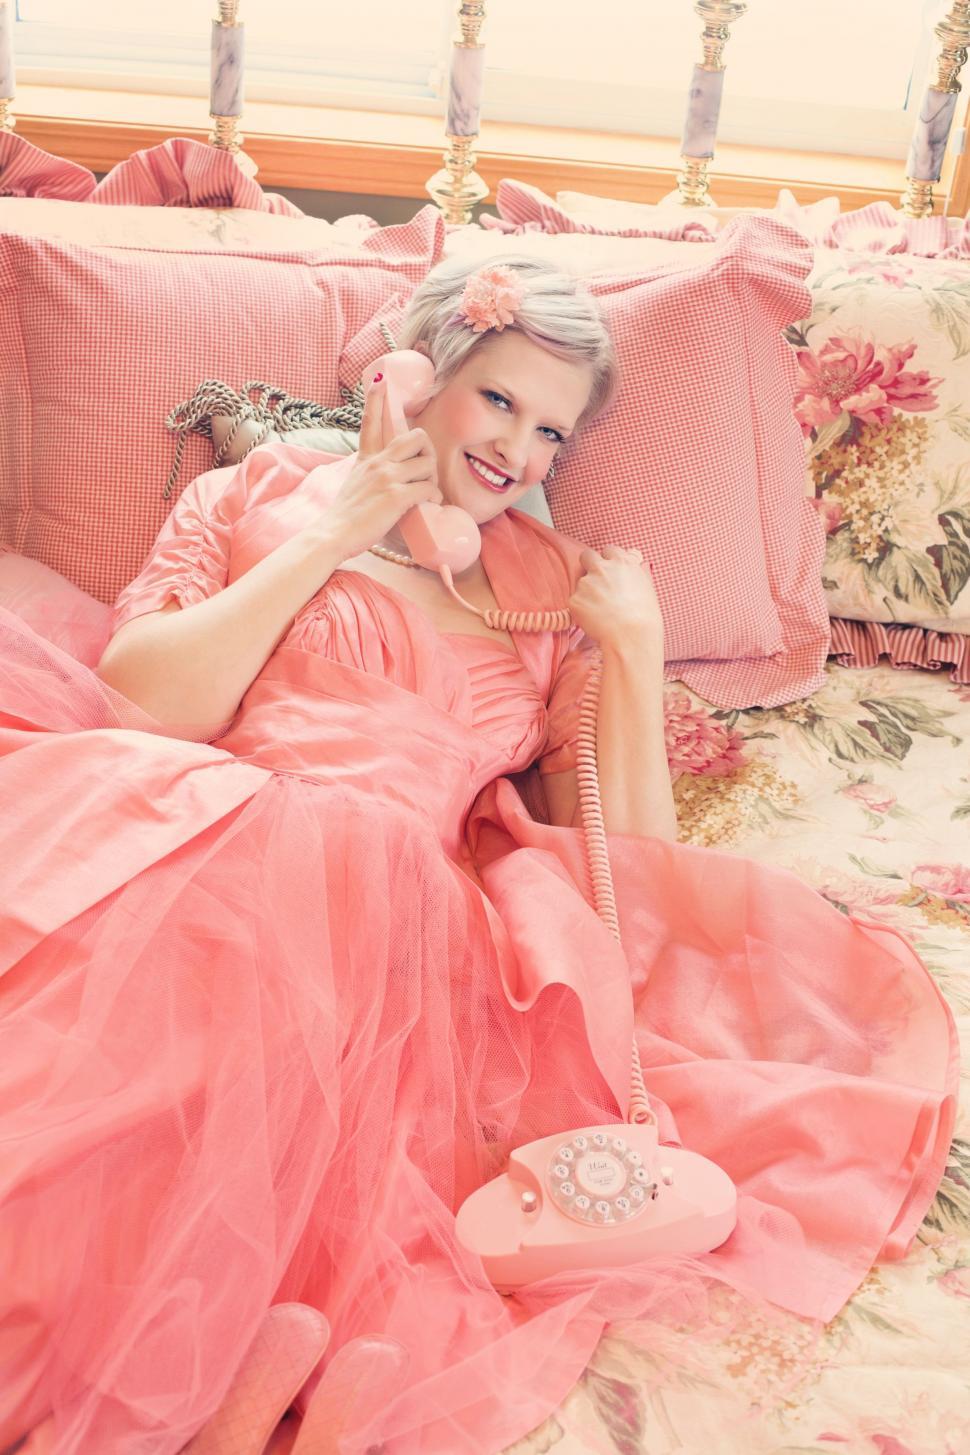 Free Image of Smiling Blonde Woman Talking on pink rotary dial telephone in bedroom 